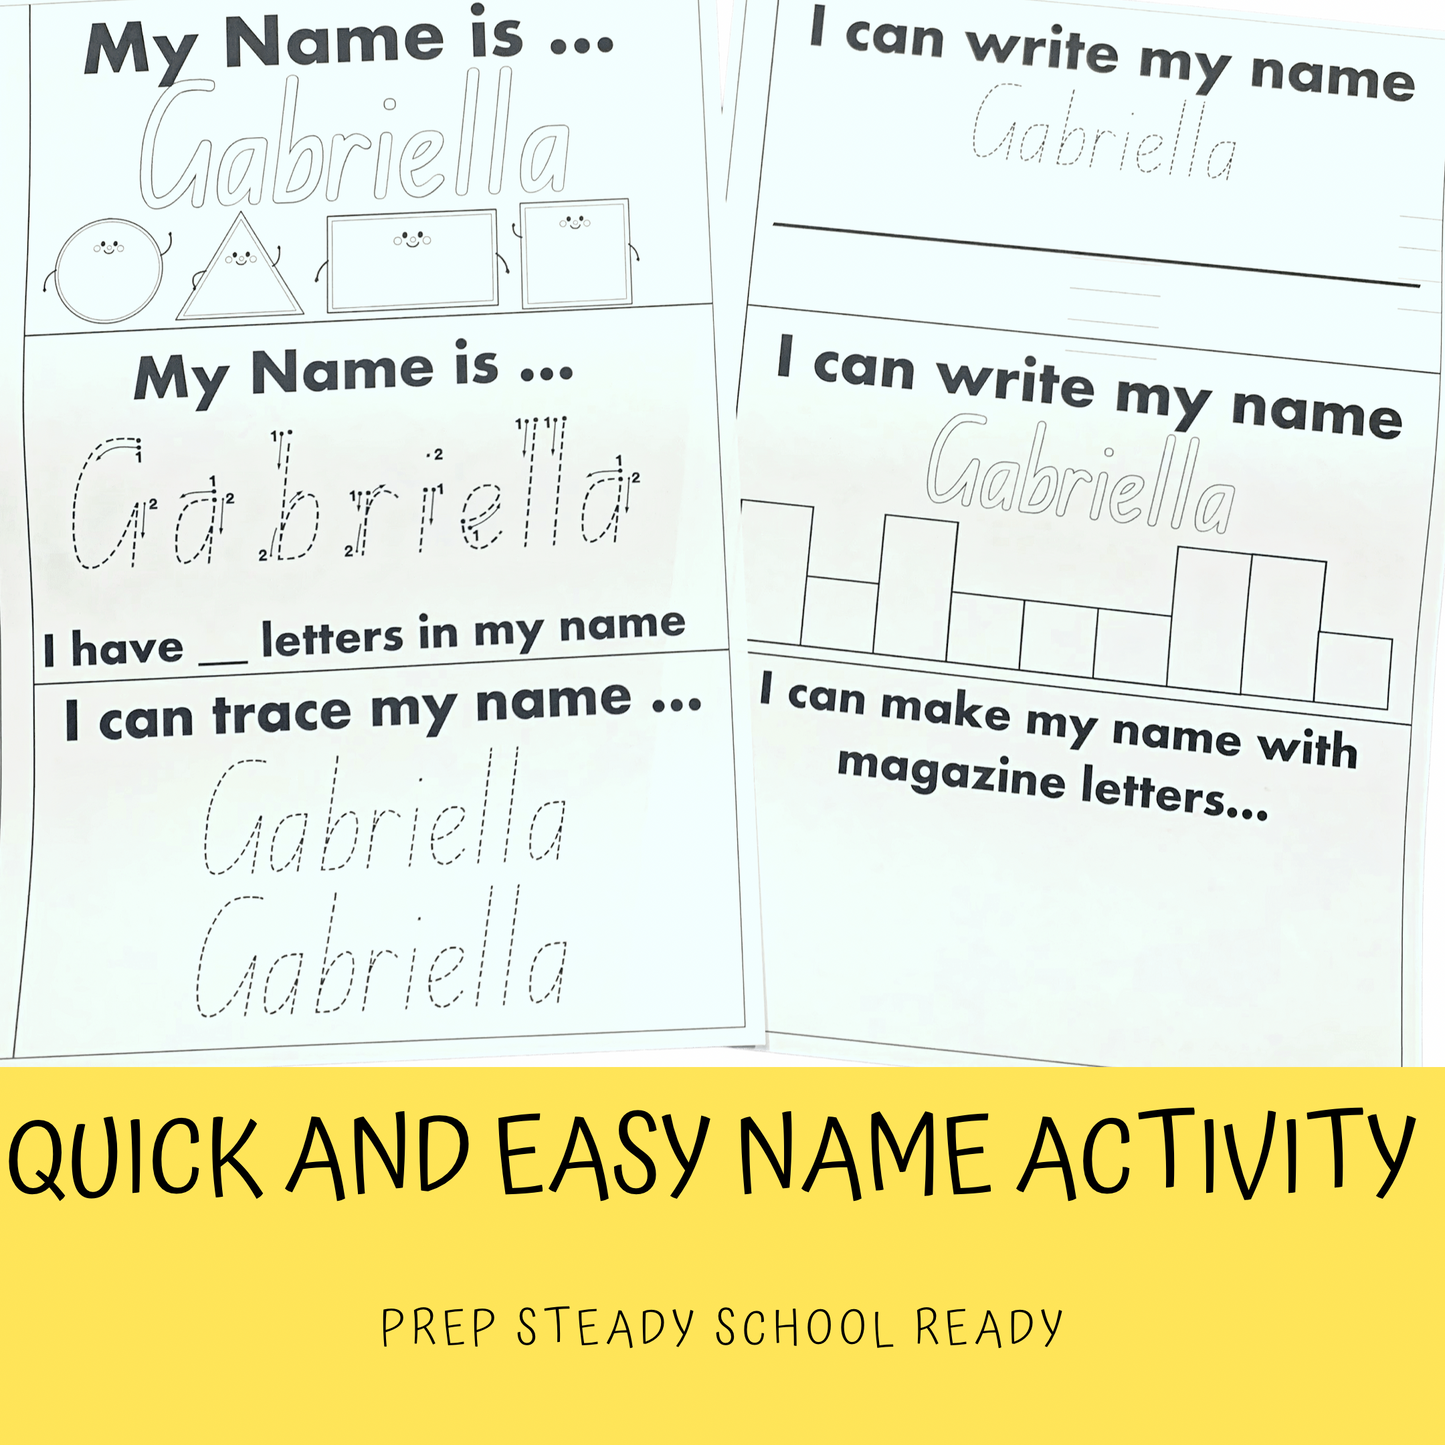 Quick and Easy DIGITAL Name Activity